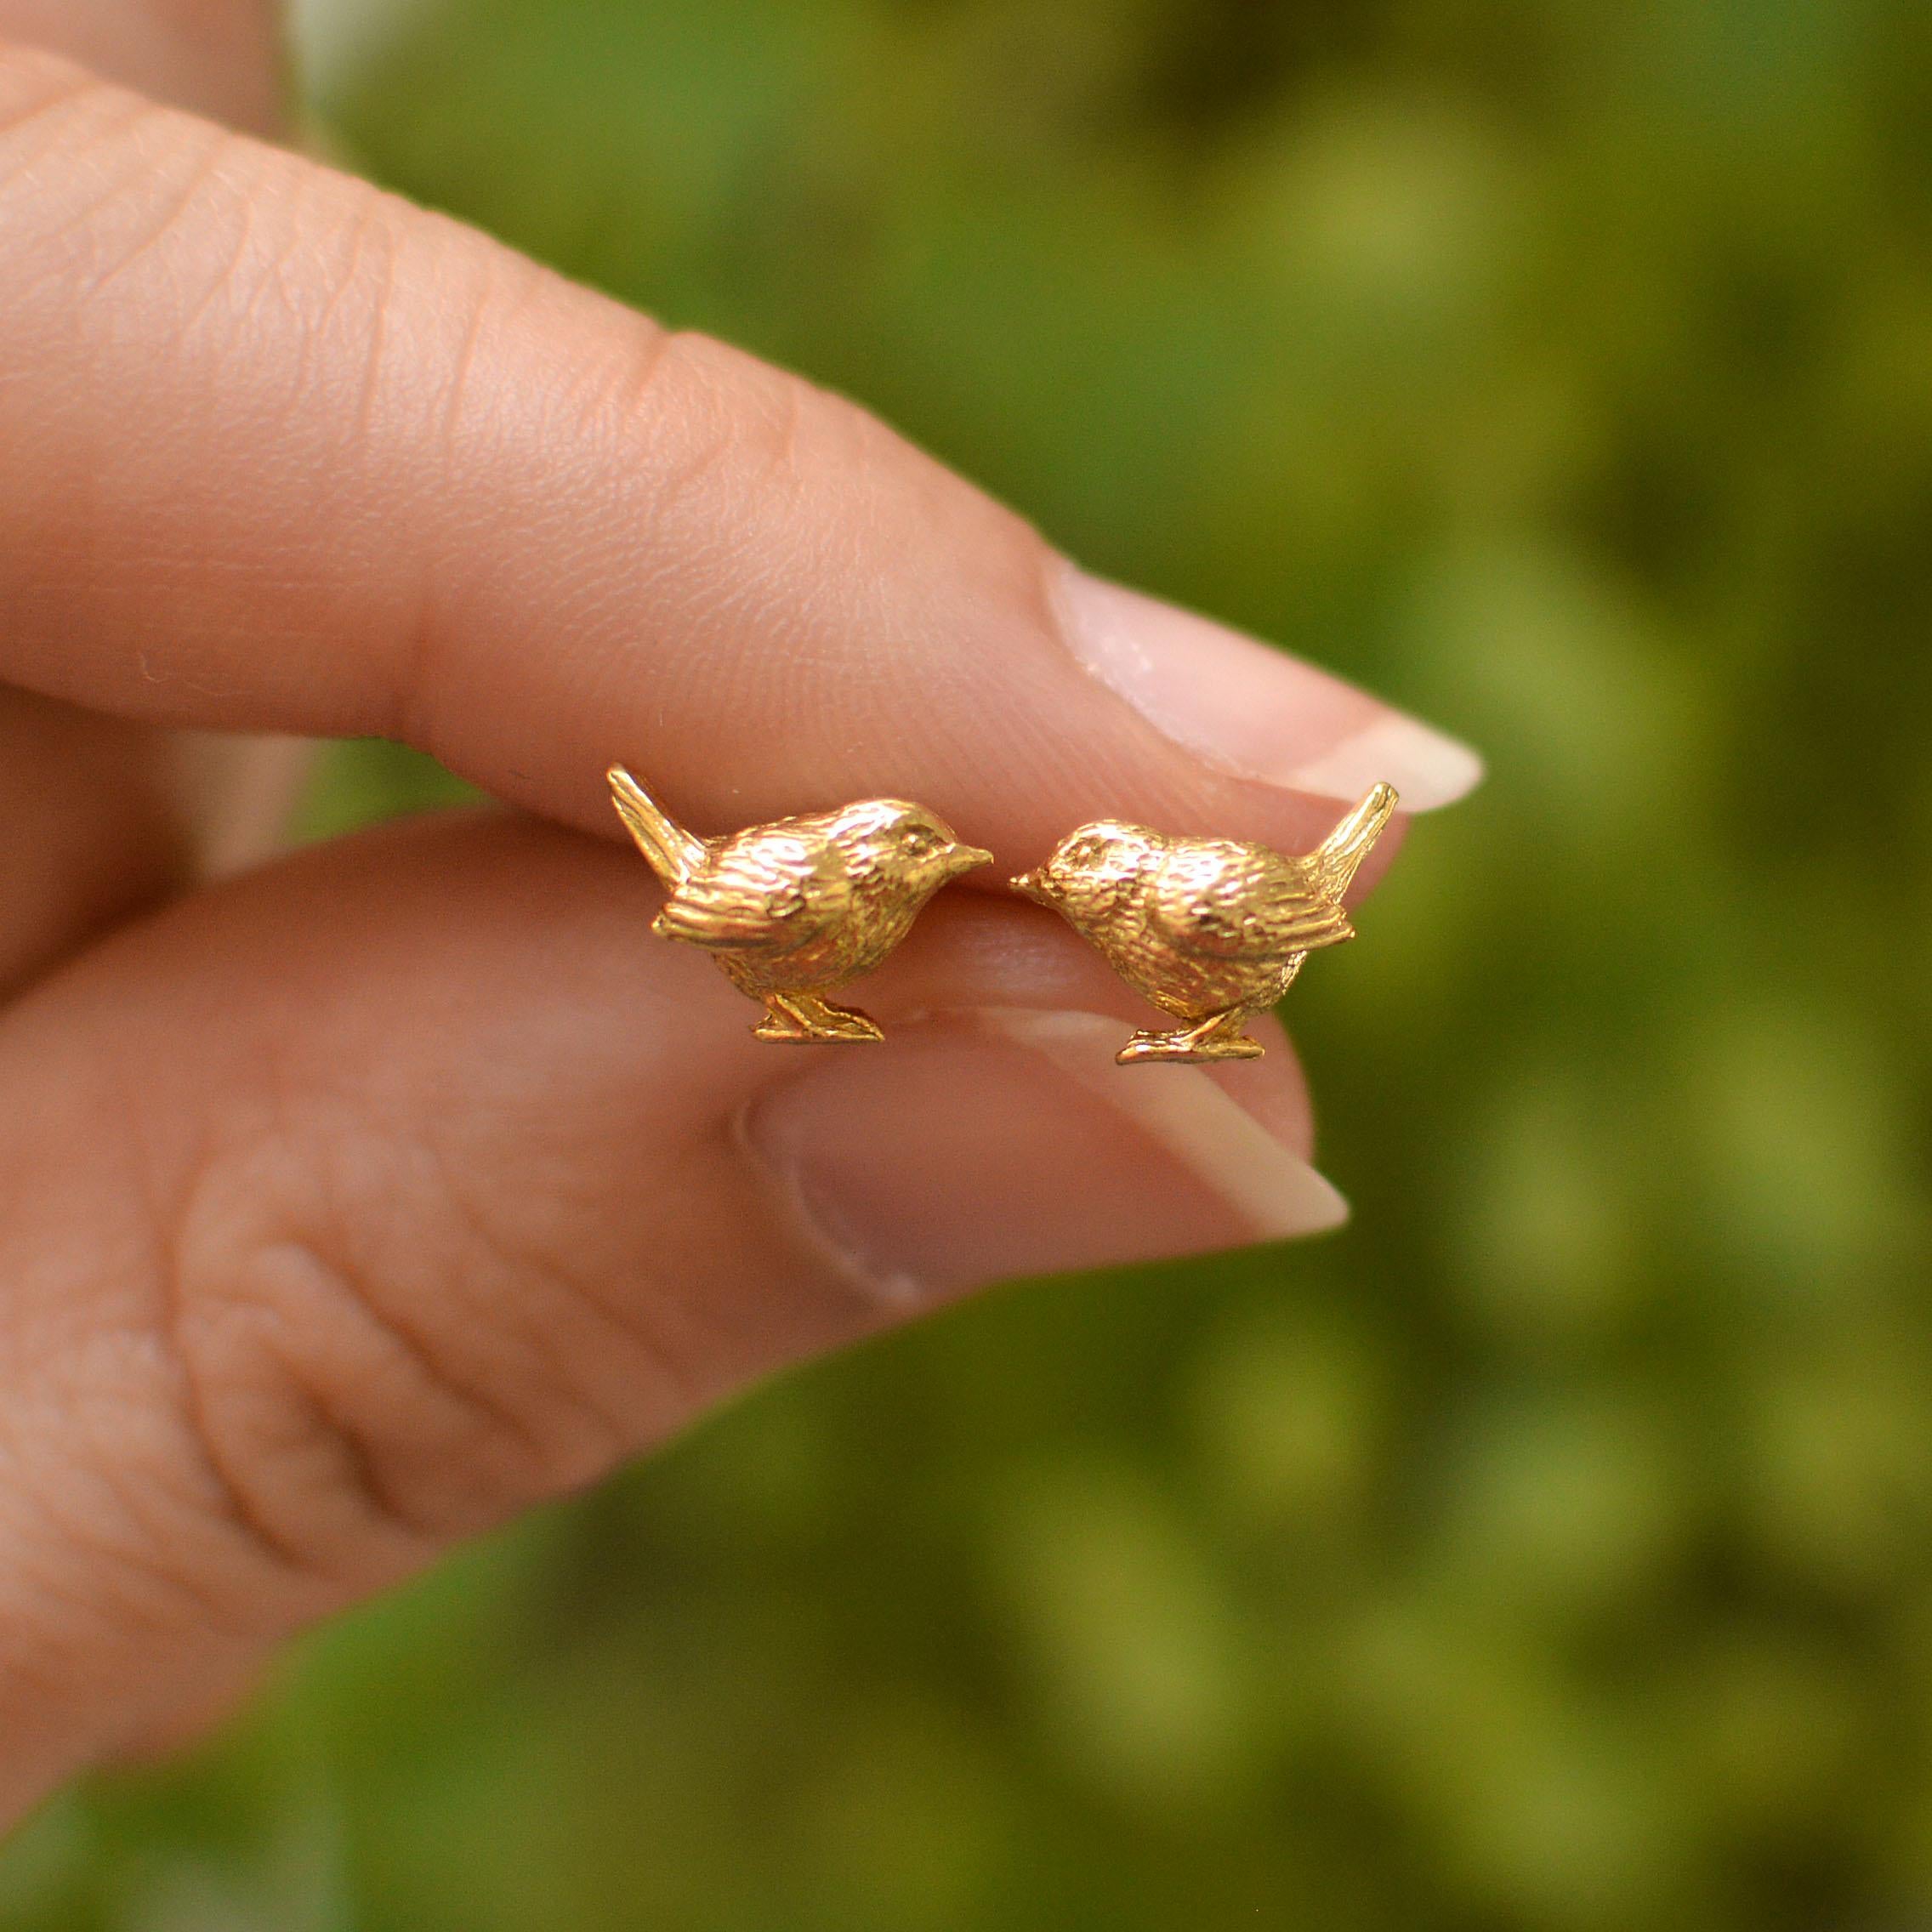 These adorably tiny wren stud earrings are cast in solid 18 Carat gold and finished by hand, and created from Lucy's original hand-sculpted design. 

These wren earrings are made in London, United Kingdom using recycled or Fairtrade Gold. Metals are